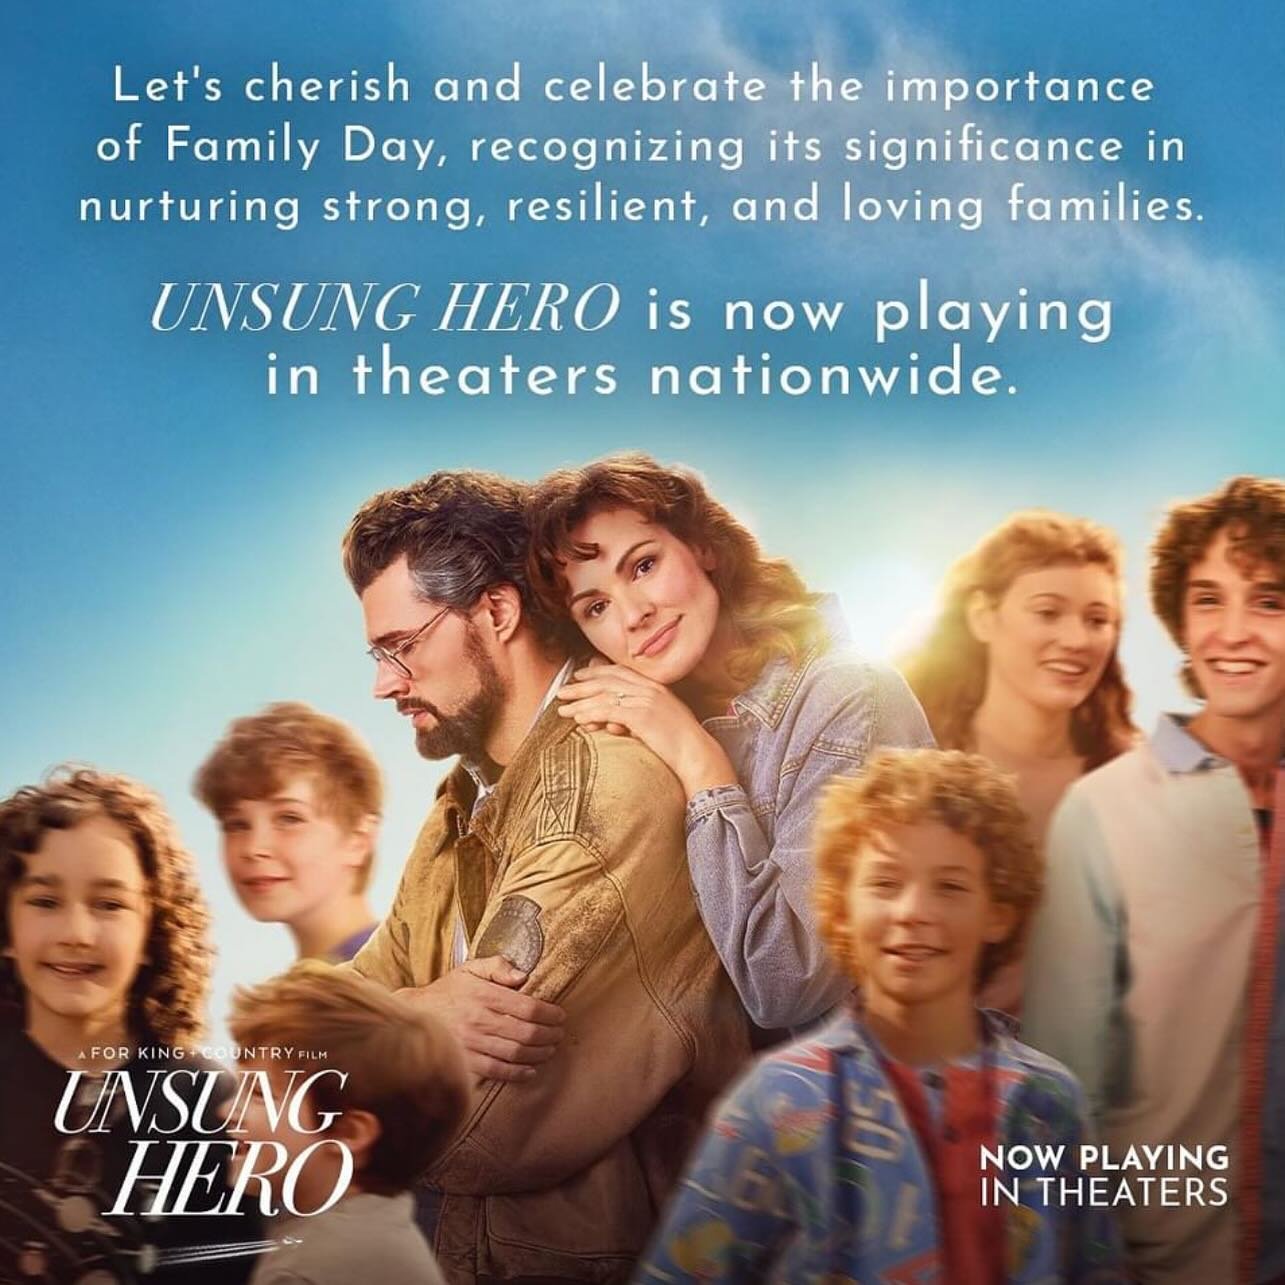 The @unsungheromovie is one of the most honest, vulnerable, and inspiring family stories I have seen in a long time. The screen is filled with moments in life that will bring tears, laughter, understanding, and hope. I don&rsquo;t casually say this i